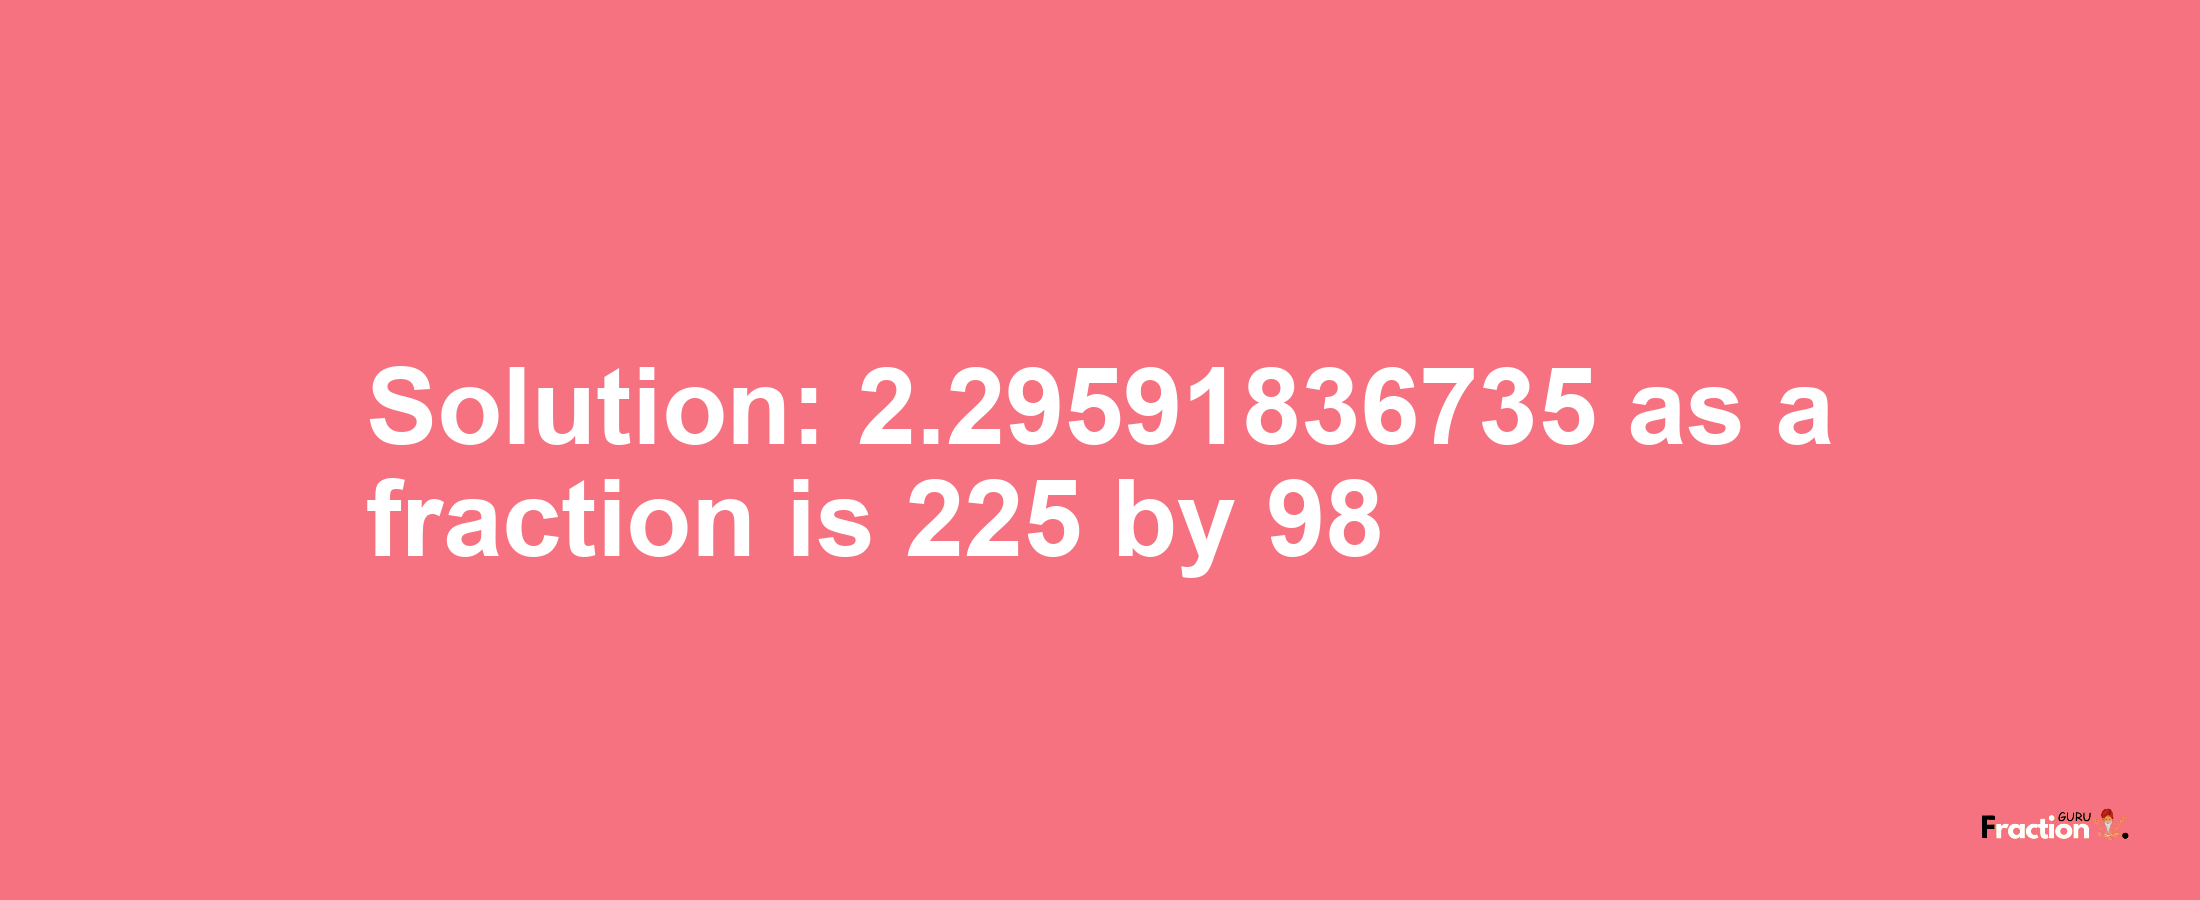 Solution:2.29591836735 as a fraction is 225/98